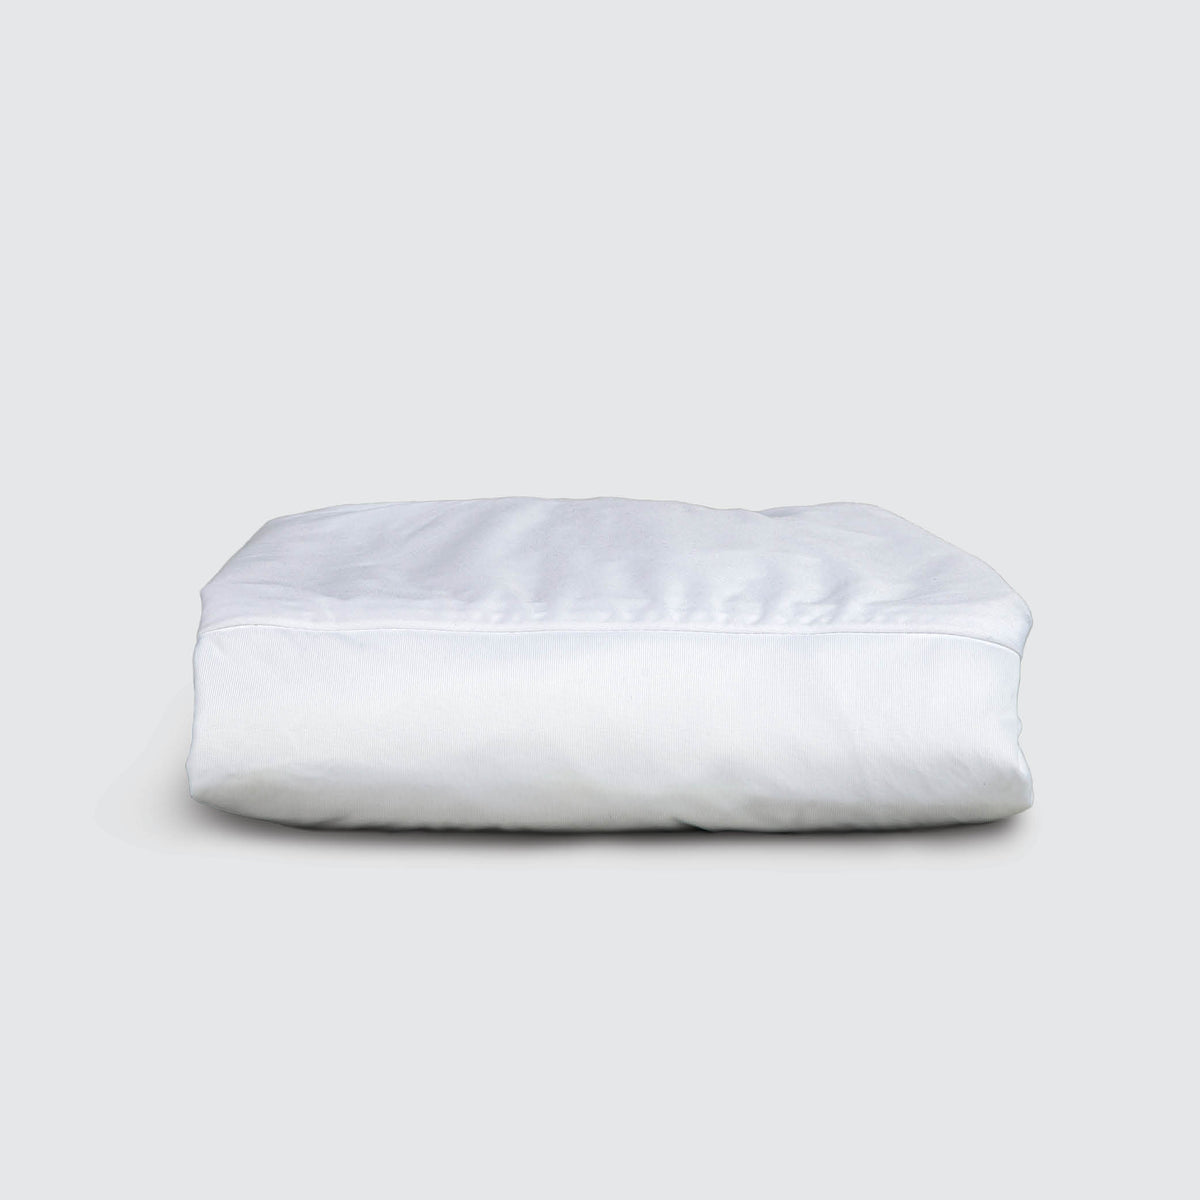 Image of a neatly folded white mattress protector on a white background